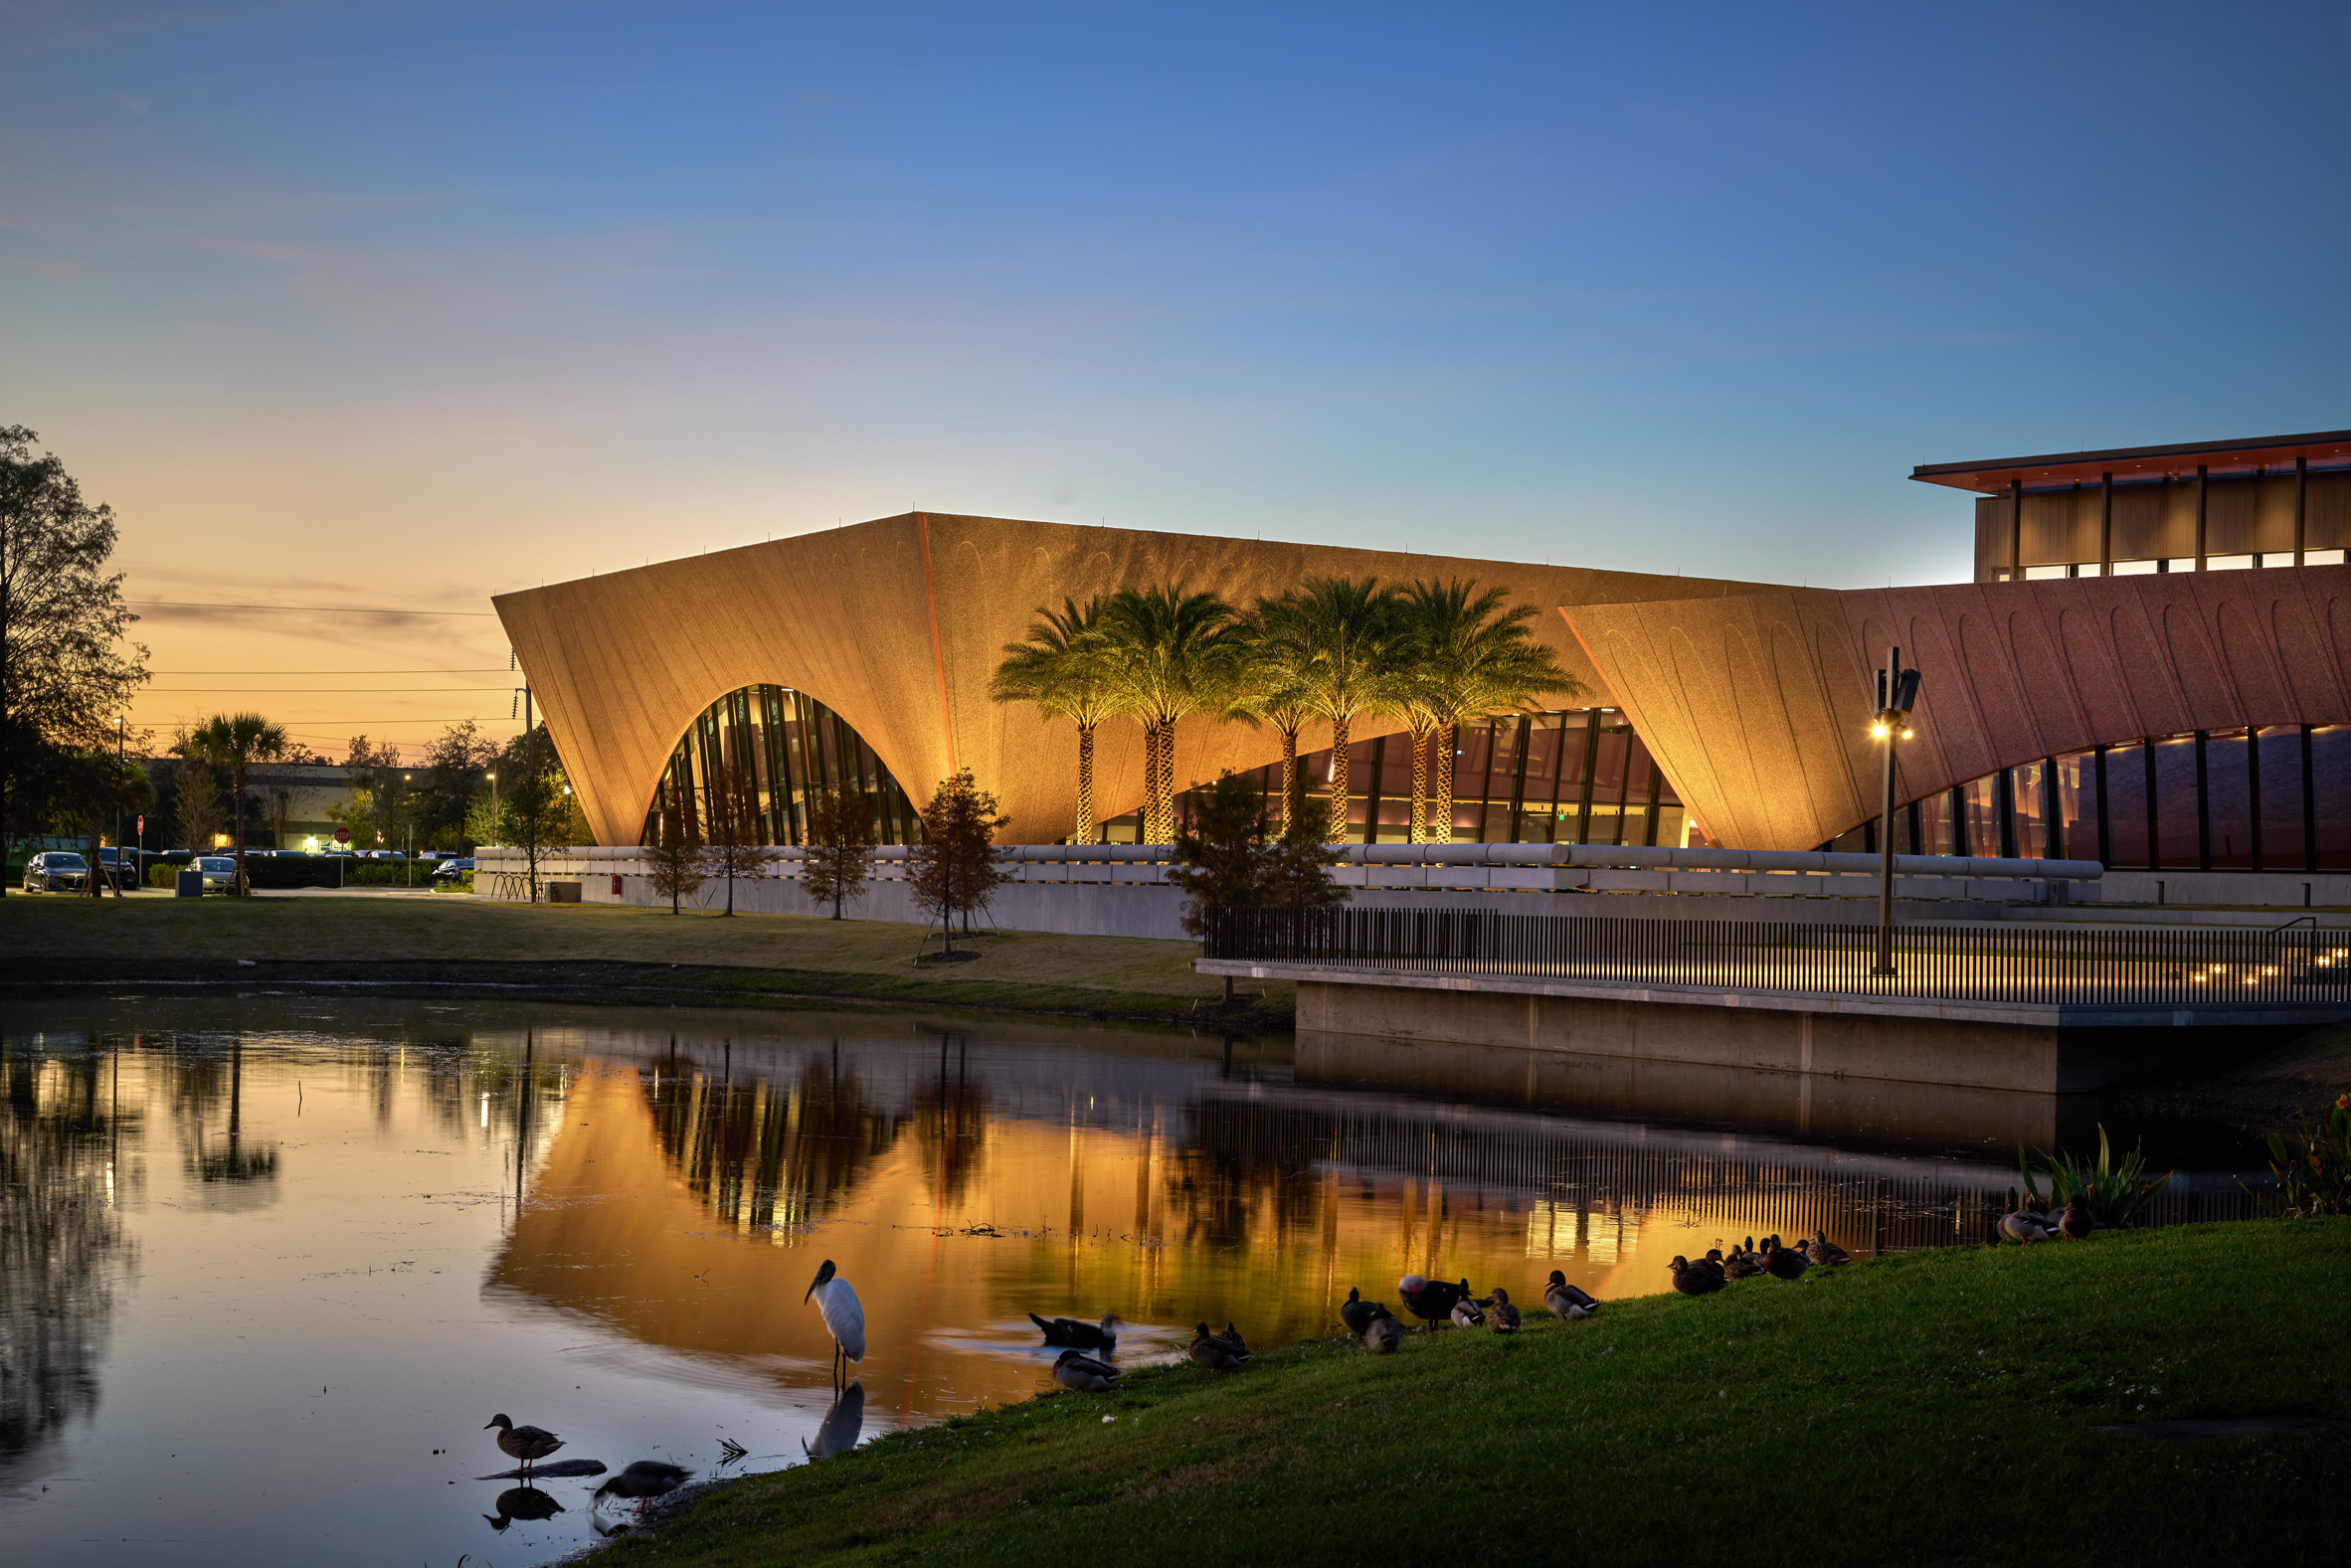 Image of Winter Park Library & Events Center by a lake